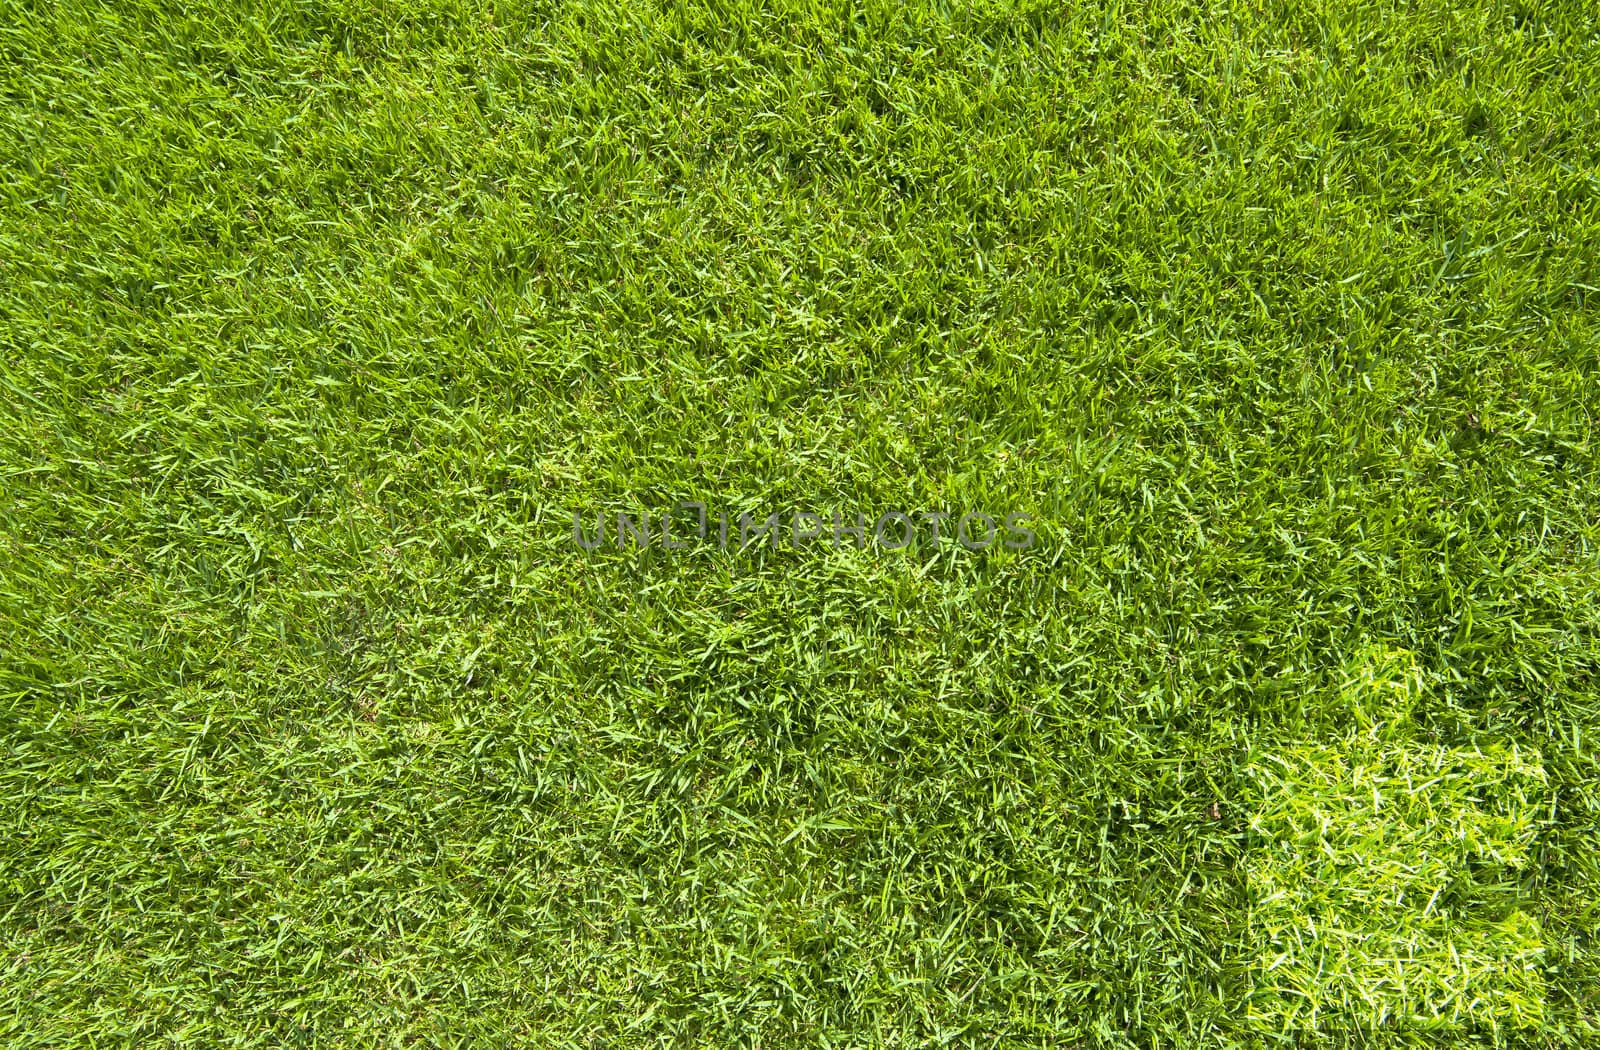 Jigsaw on green grass texture and background 